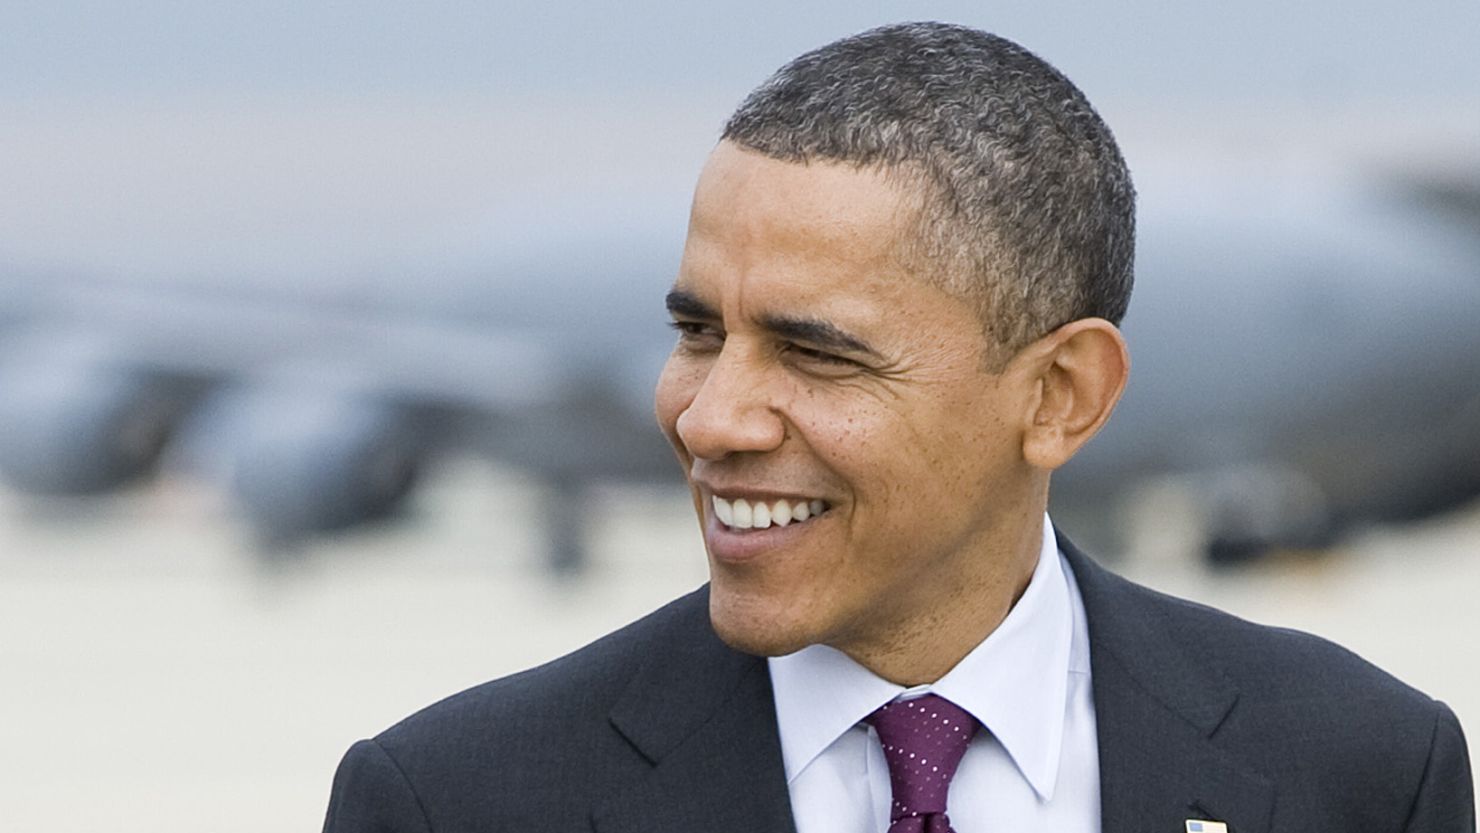 According to the survey, Latino registered voters favor President Obama by a margin of 2-1.